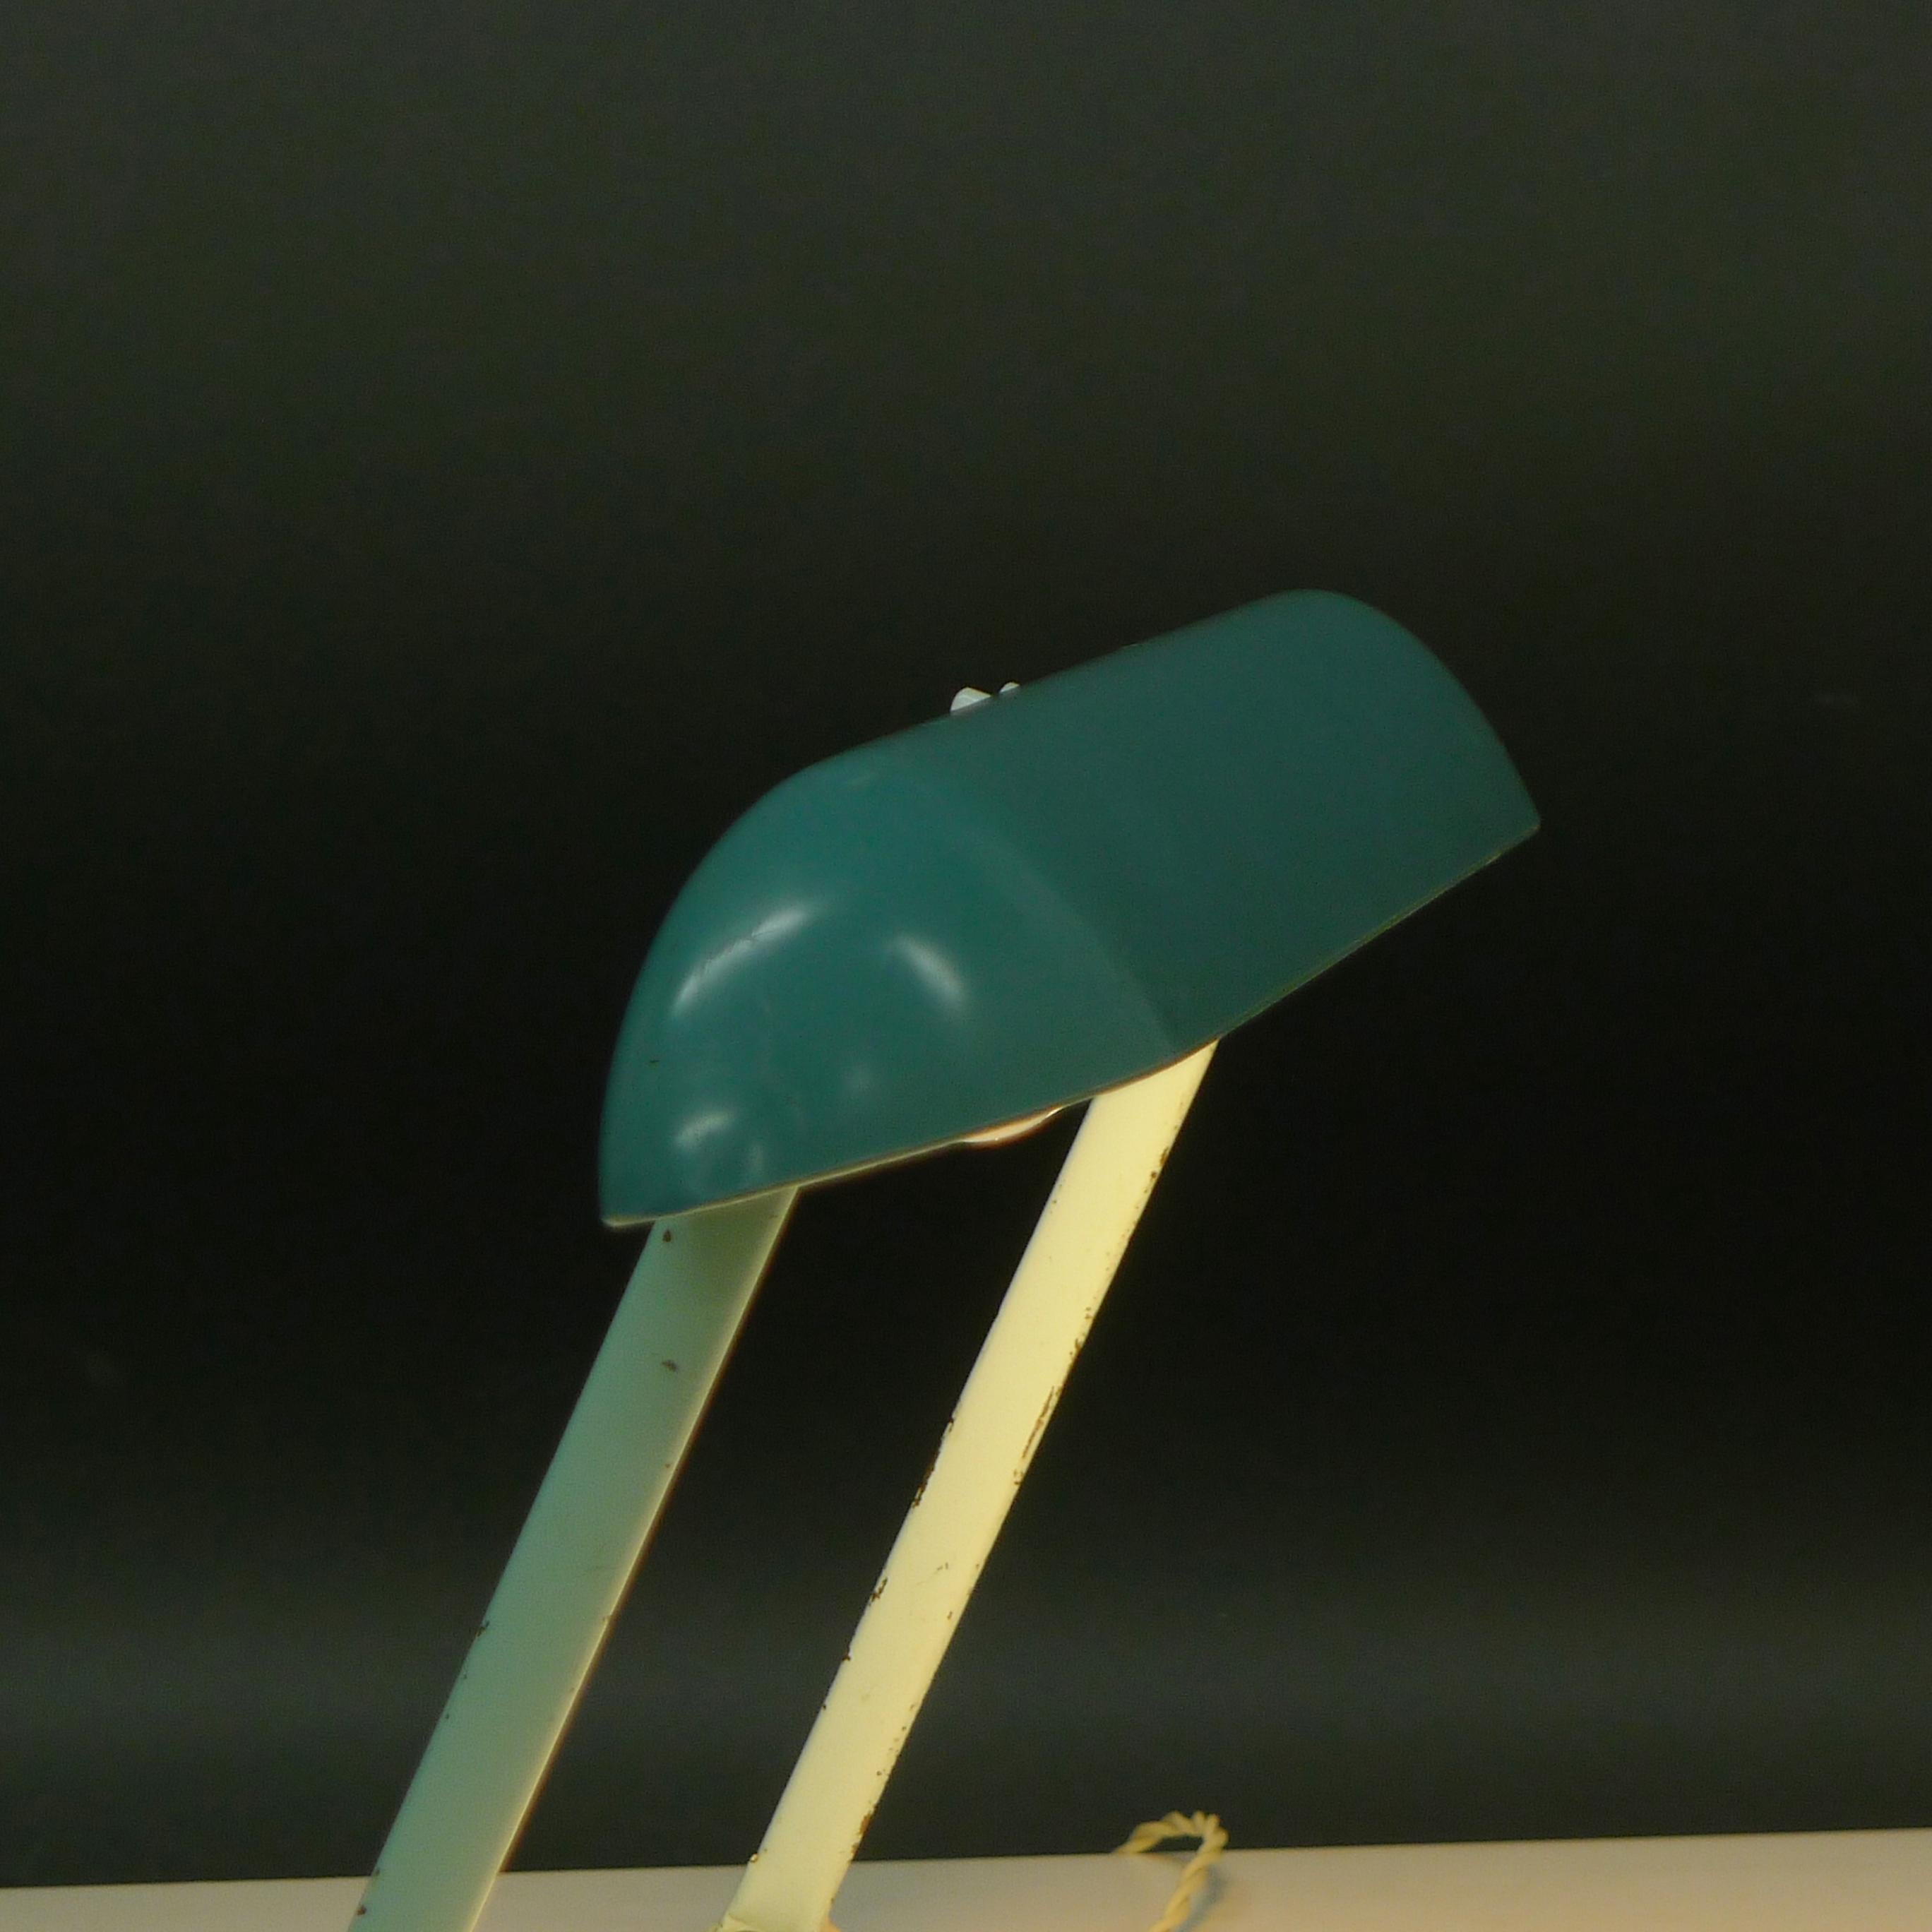 Philips Bakelite Desk Lamp, design attributed to Charlotte Perriand, 1950s For Sale 3